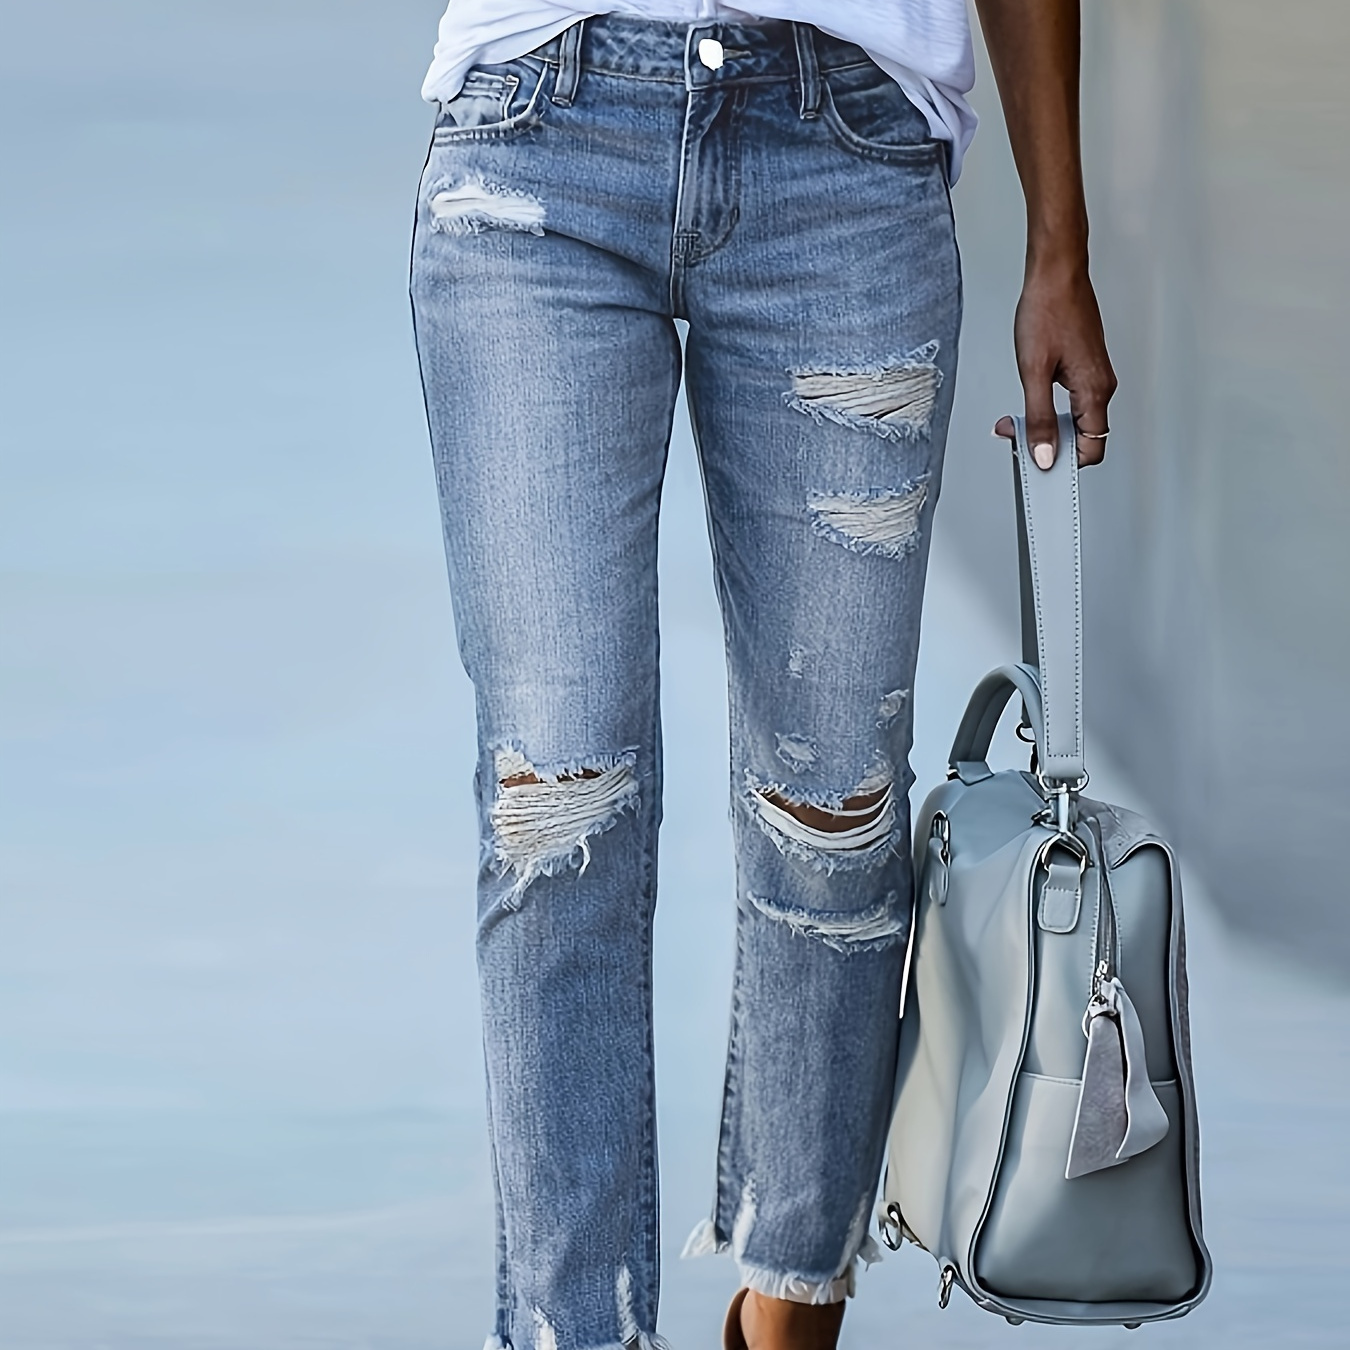 

Women's Stretch Ripped Ankle-length Jeans, Street Style Denim, Frayed Hem, Skinny Fit, Casual Fashion - Light Blue Wash